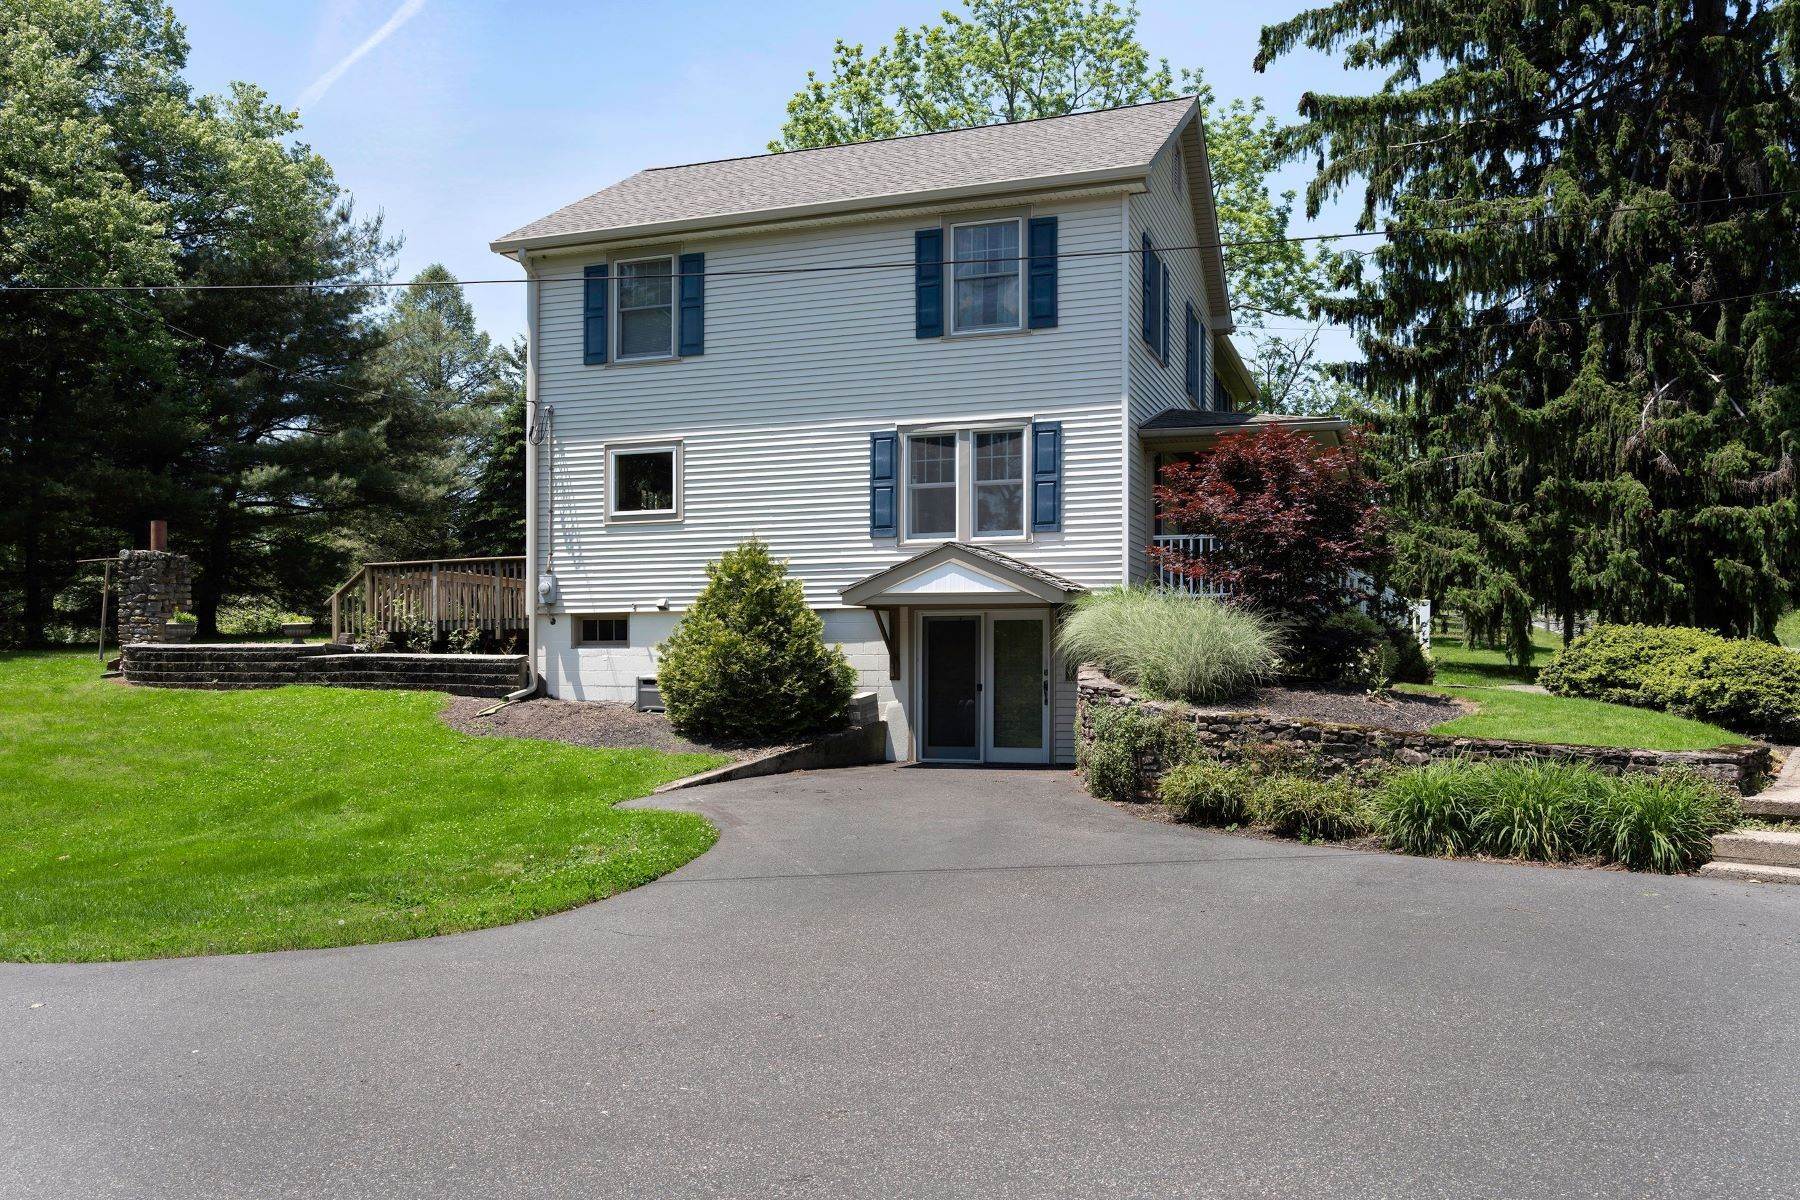 2. Single Family Homes for Sale at A Charming Place To Call Home 198 Sandy Ridge Mount Airy Road, Stockton, New Jersey 08559 United States